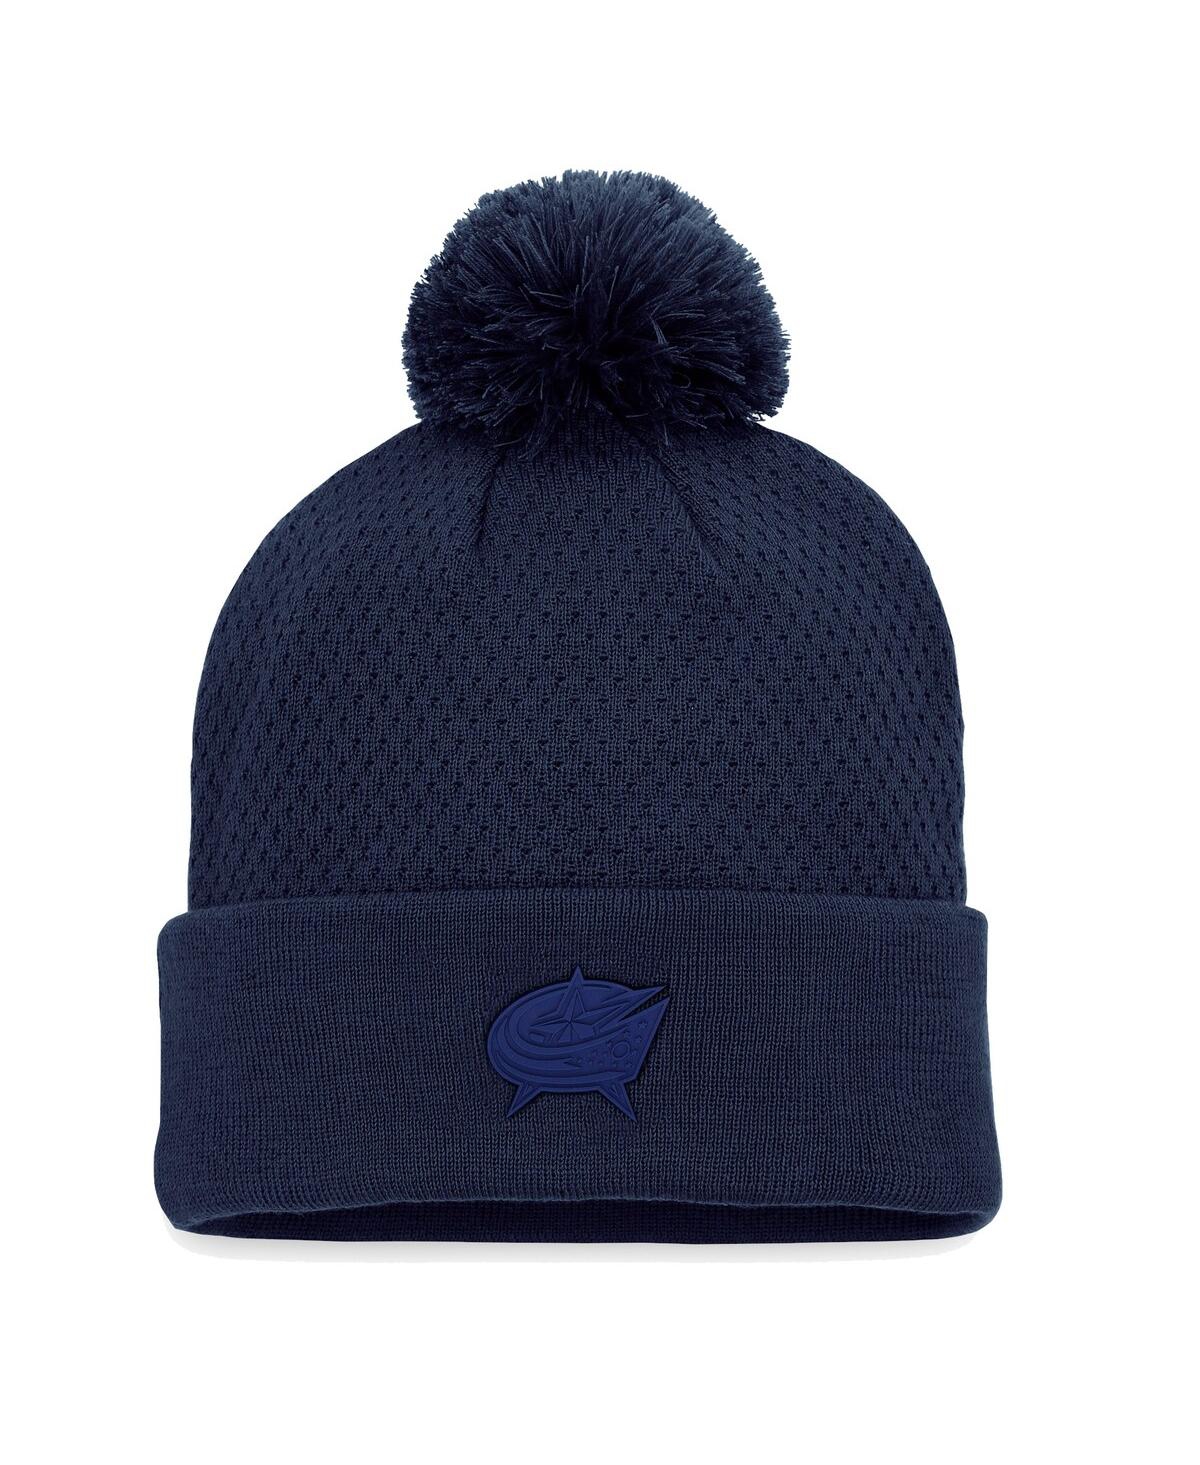 Women's Fanatics Navy Columbus Blue Jackets Authentic Pro Road Cuffed Knit Hat with Pom - Navy